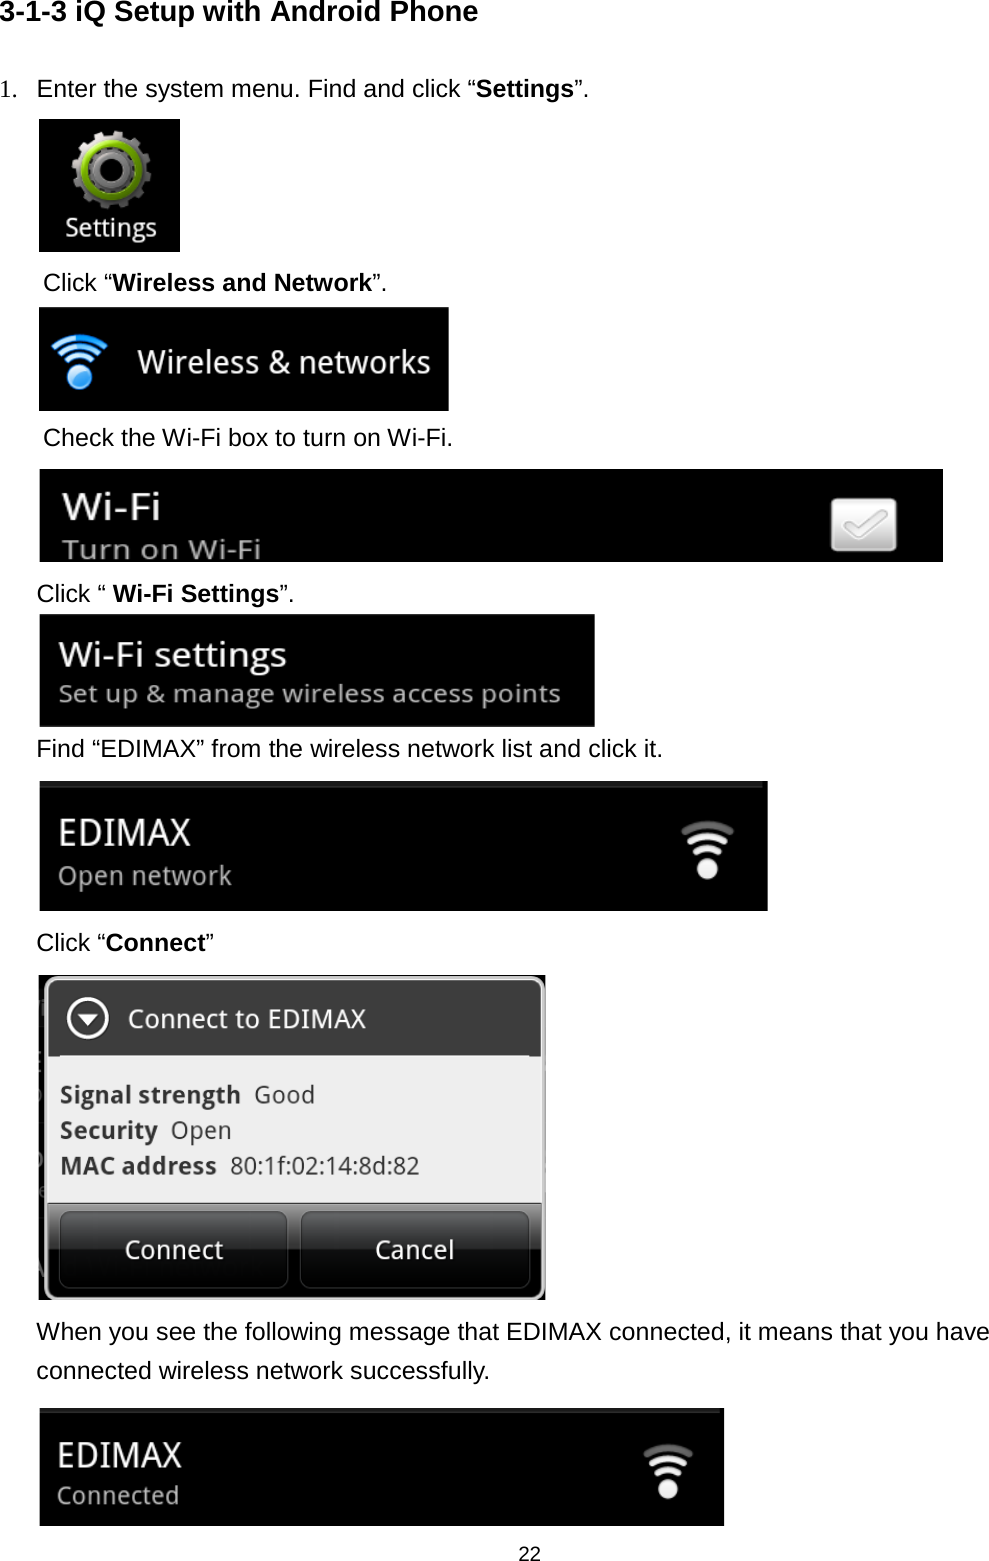 22  3-1-3 iQ Setup with Android Phone 1. Enter the system menu. Find and click “Settings”.  Click “Wireless and Network”.  Check the Wi-Fi box to turn on Wi-Fi.    Click “ Wi-Fi Settings”.  Find “EDIMAX” from the wireless network list and click it.  Click “Connect”  When you see the following message that EDIMAX connected, it means that you have connected wireless network successfully.    